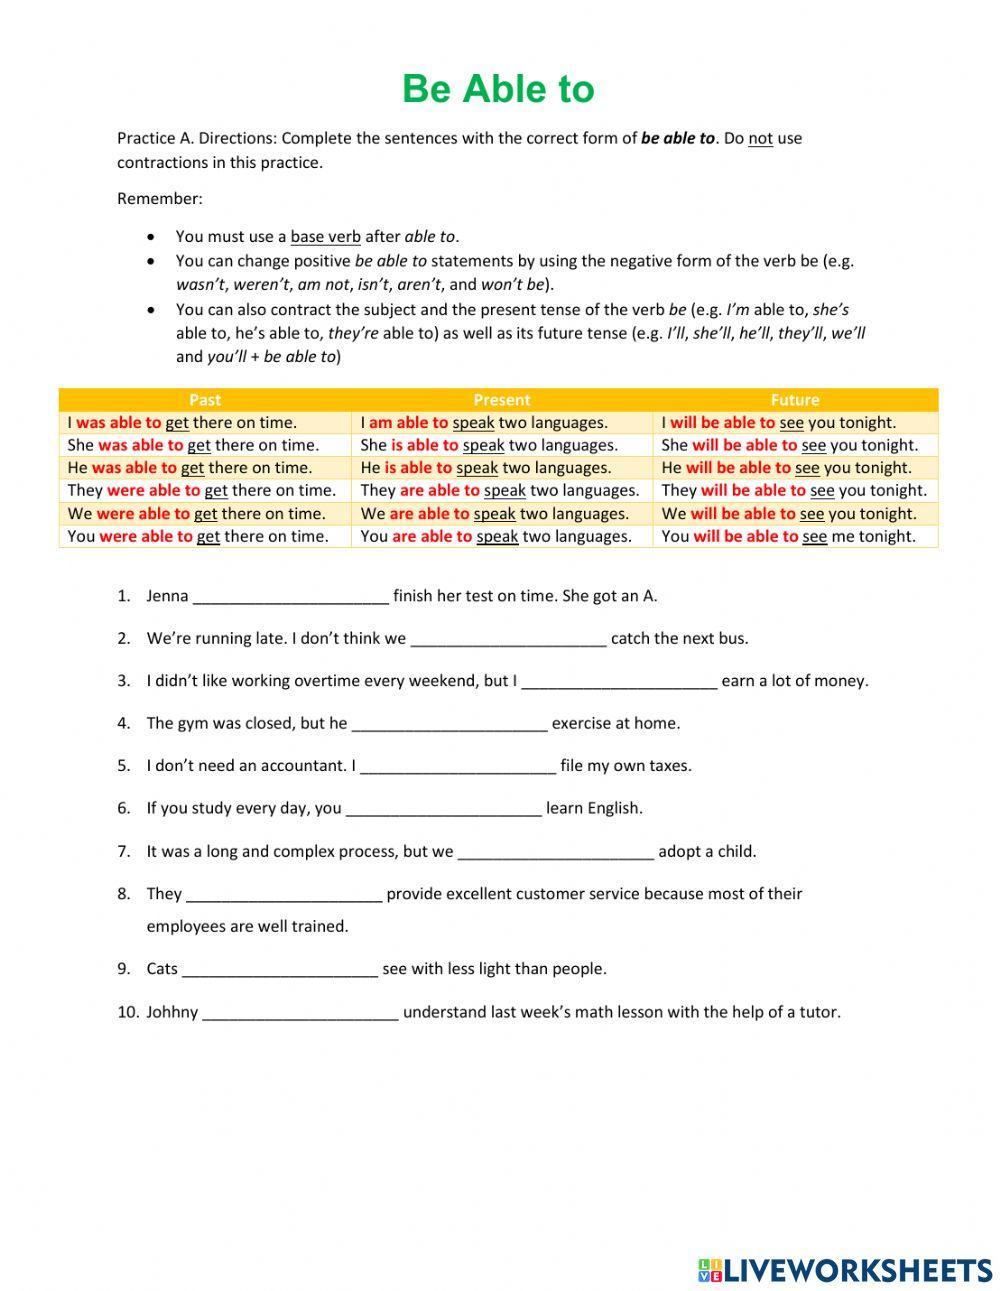 Be Able to activity | Live Worksheets